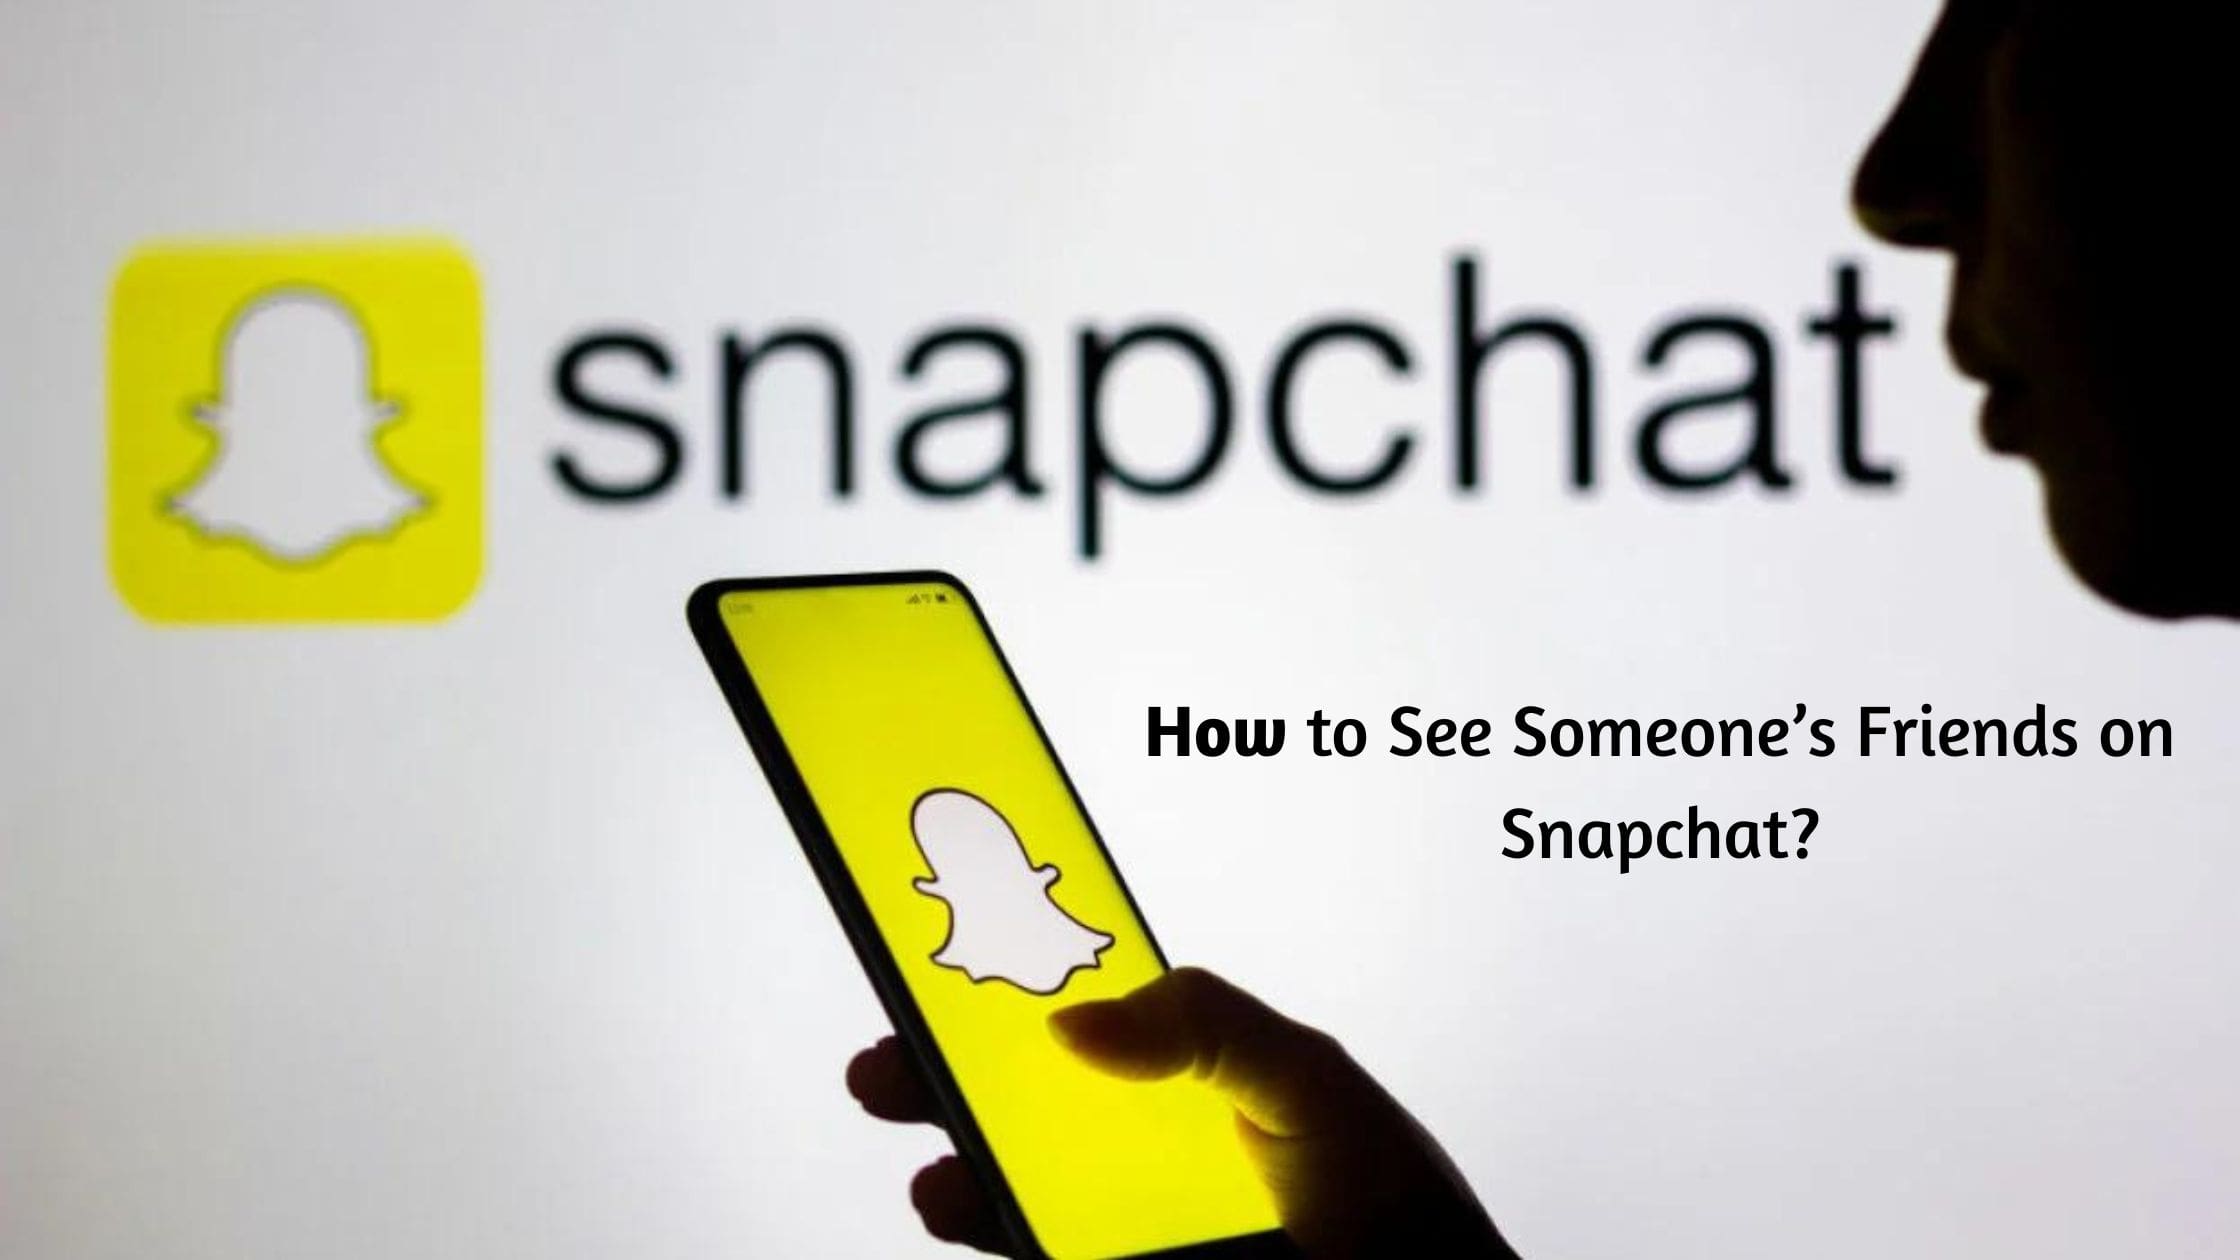 How to See Someone’s Friends on Snapchat?2022